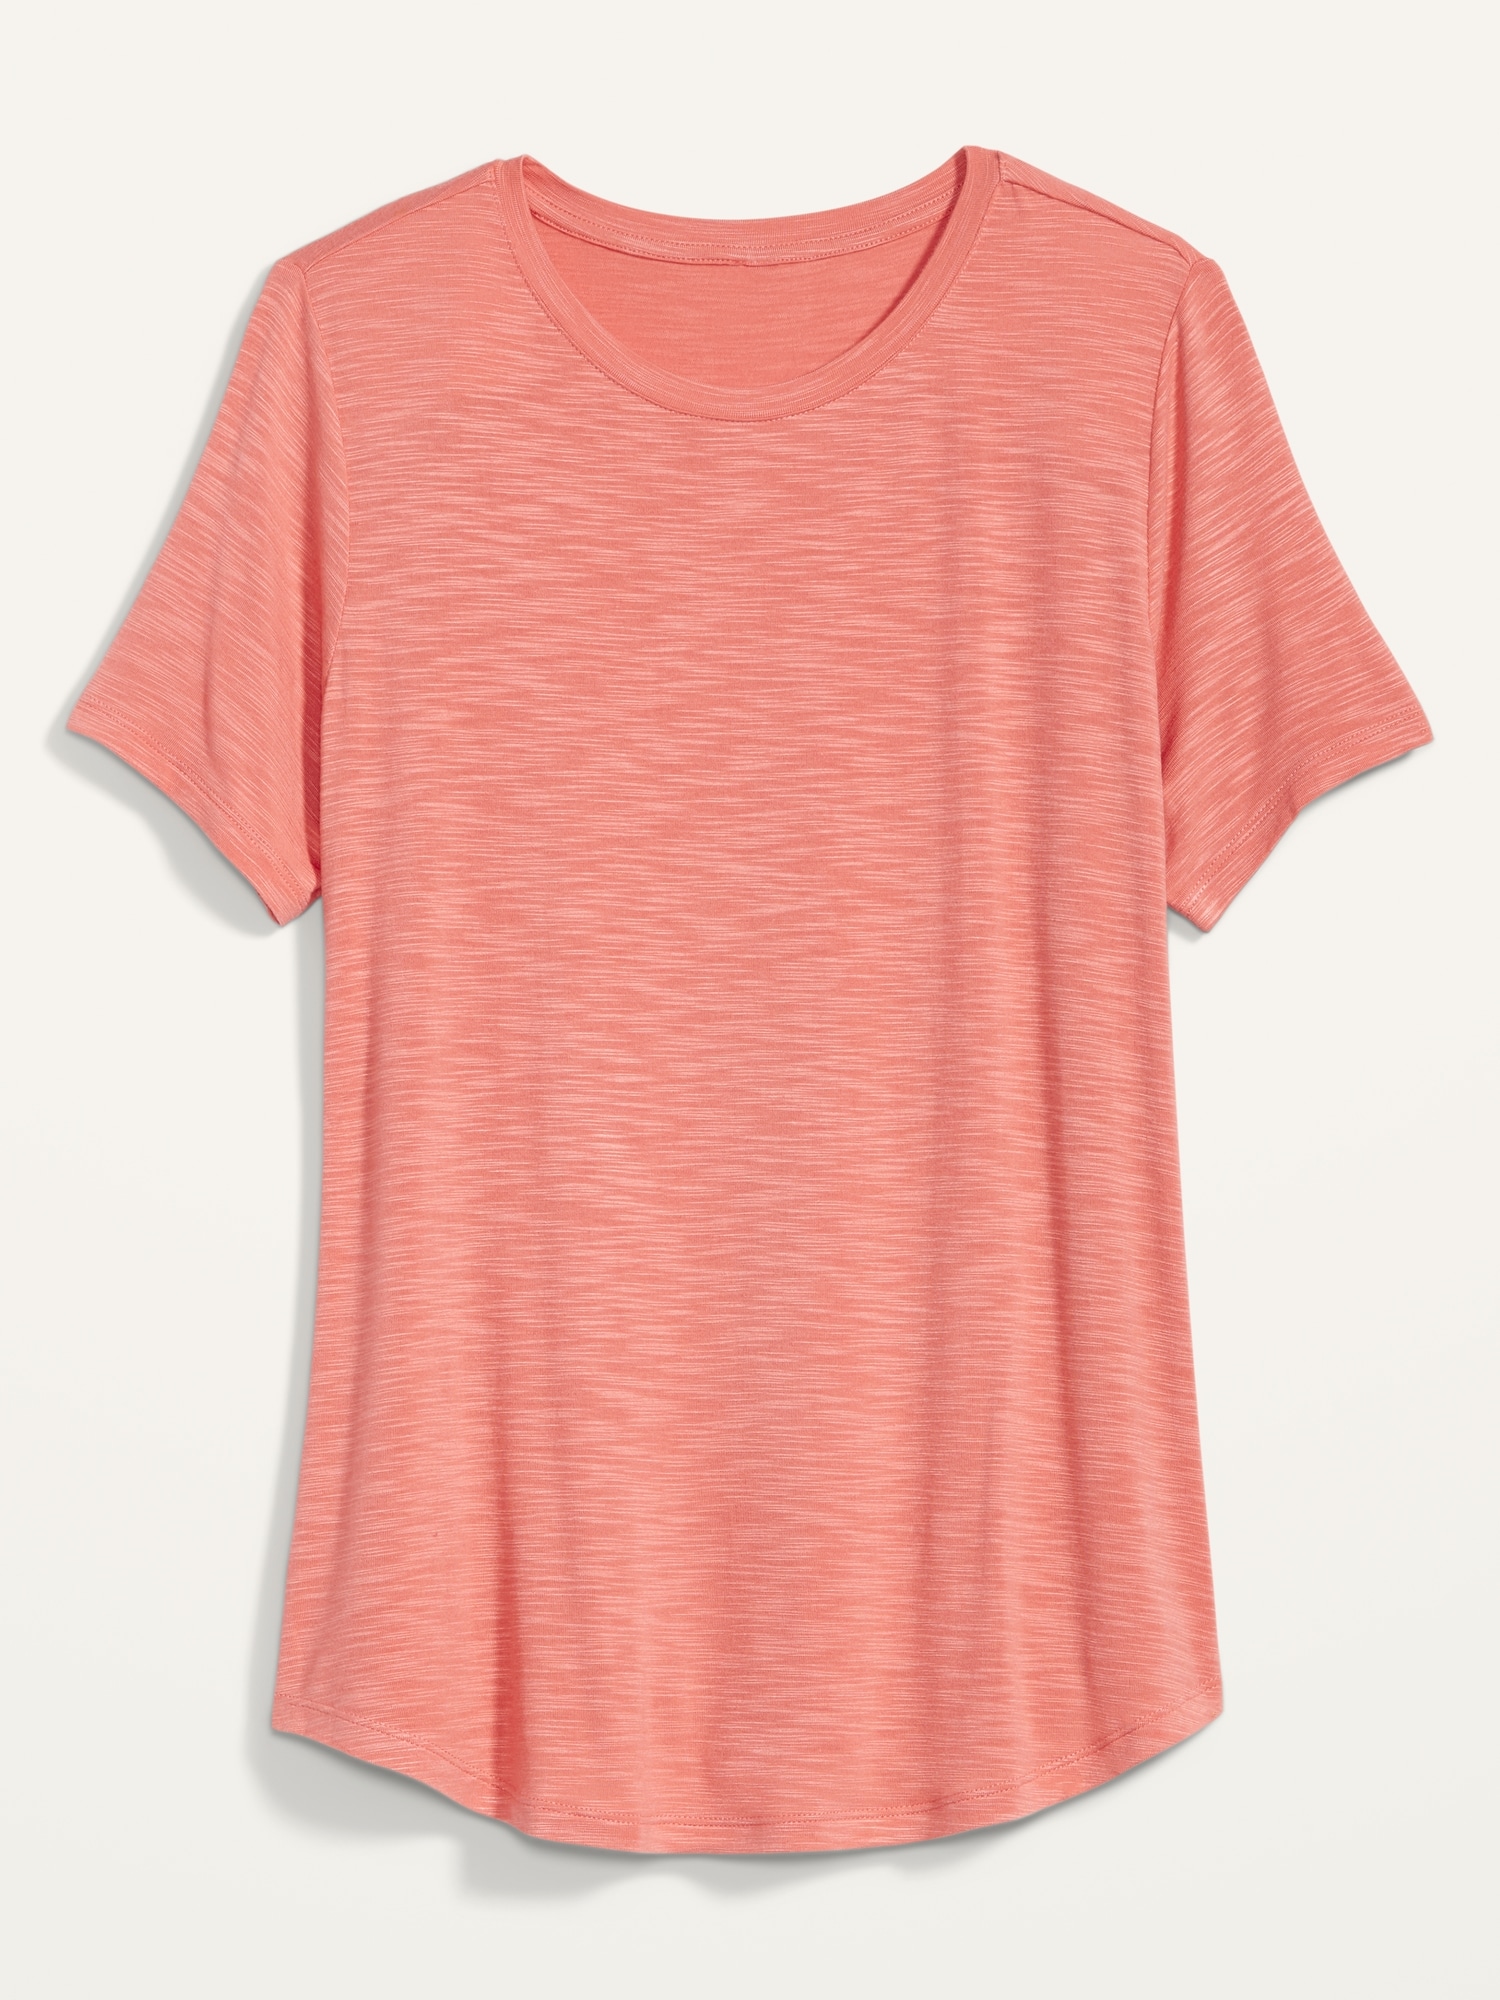 old navy red shirt womens